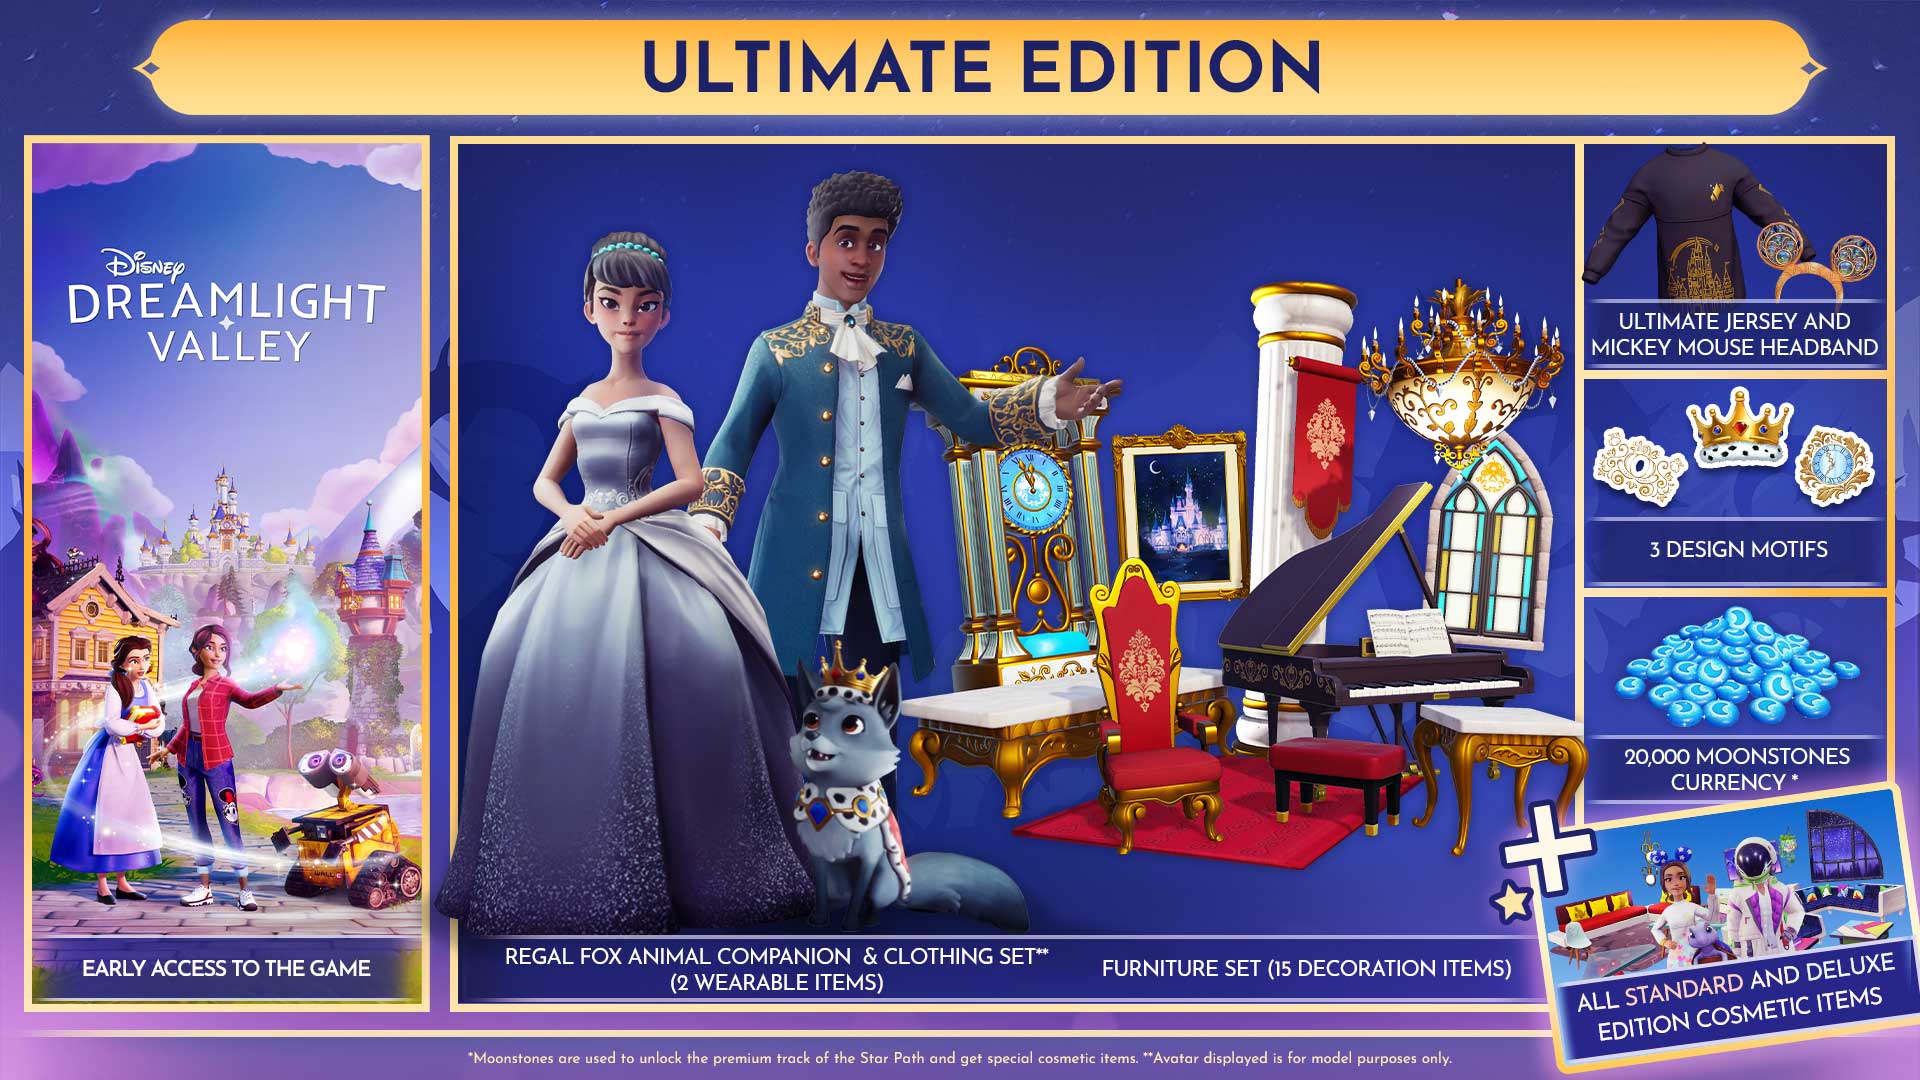 Here's what is in the Disney Dreamlight Valley Founder's Pack Editions